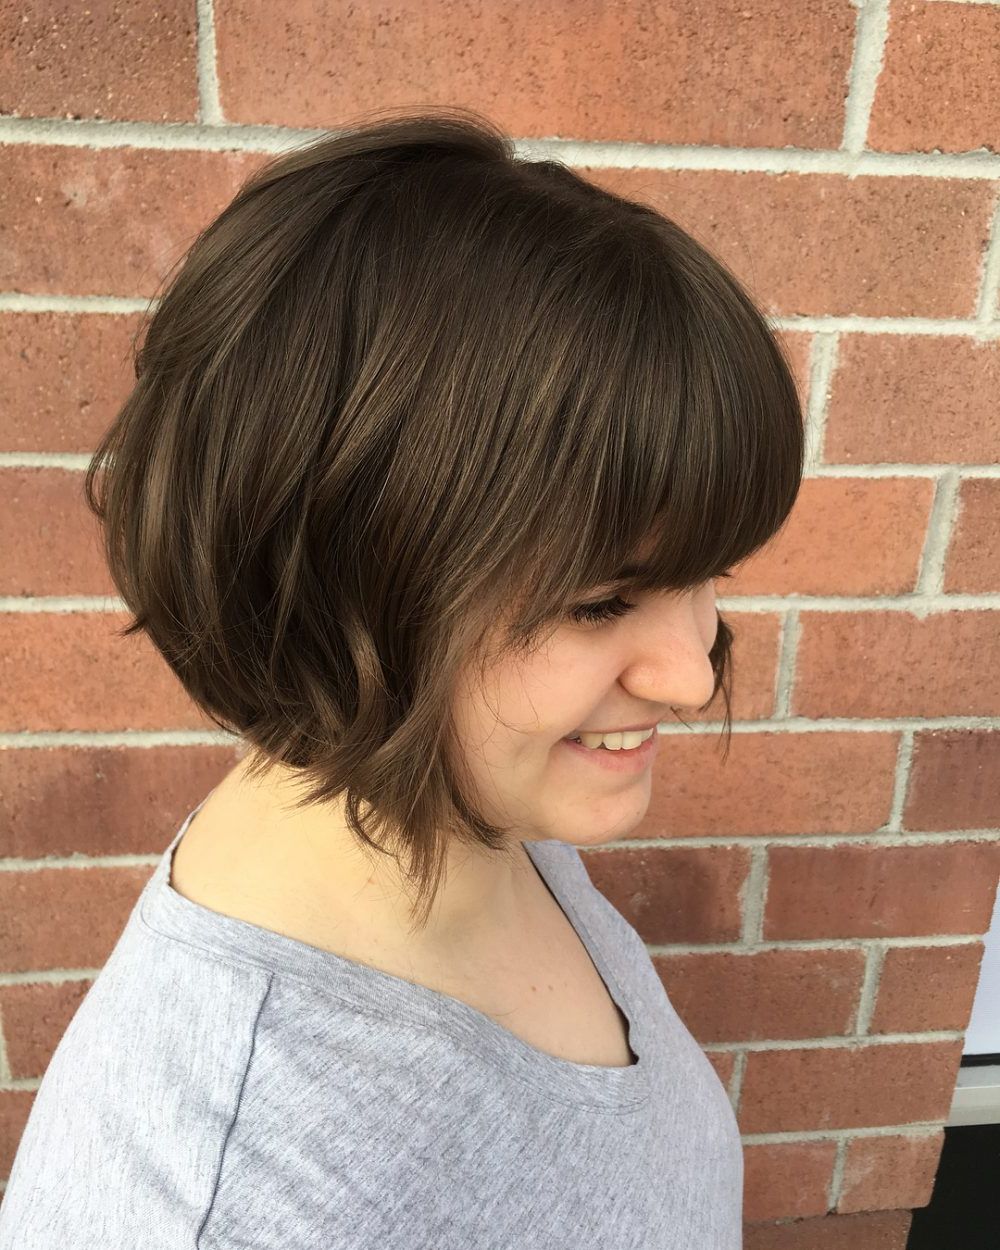 34 Greatest Short Haircuts And Hairstyles For Thick Hair For 2018 Throughout Pixie Haircuts With Short Thick Hair (Gallery 19 of 20)